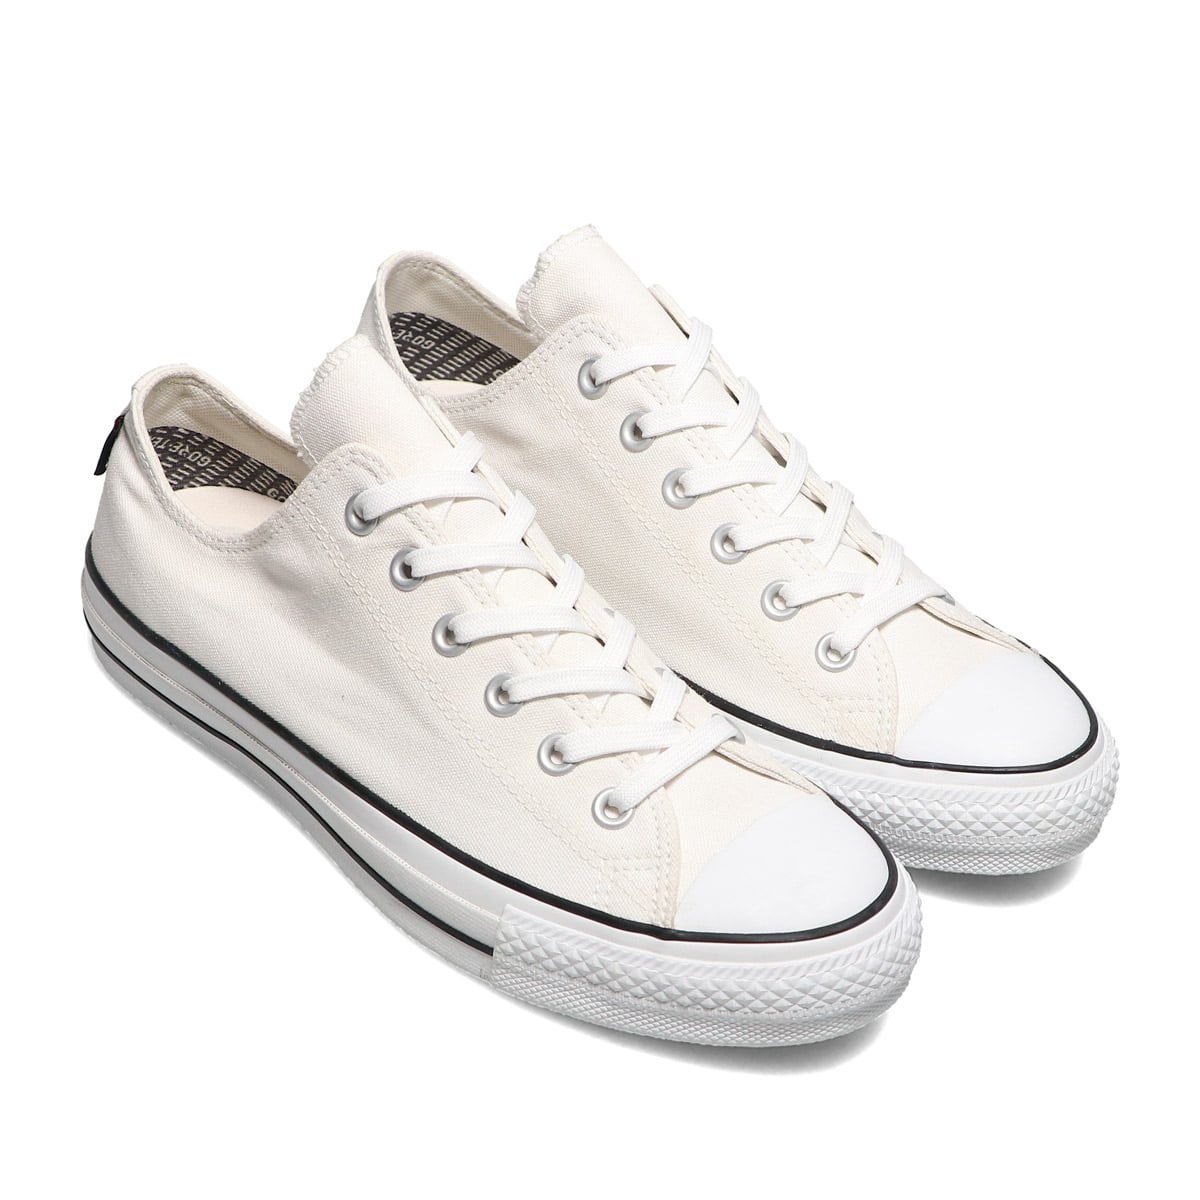 CONVERSE ALL STAR 100 GORE-TEX OX WHITE 21FW-I_photo_large